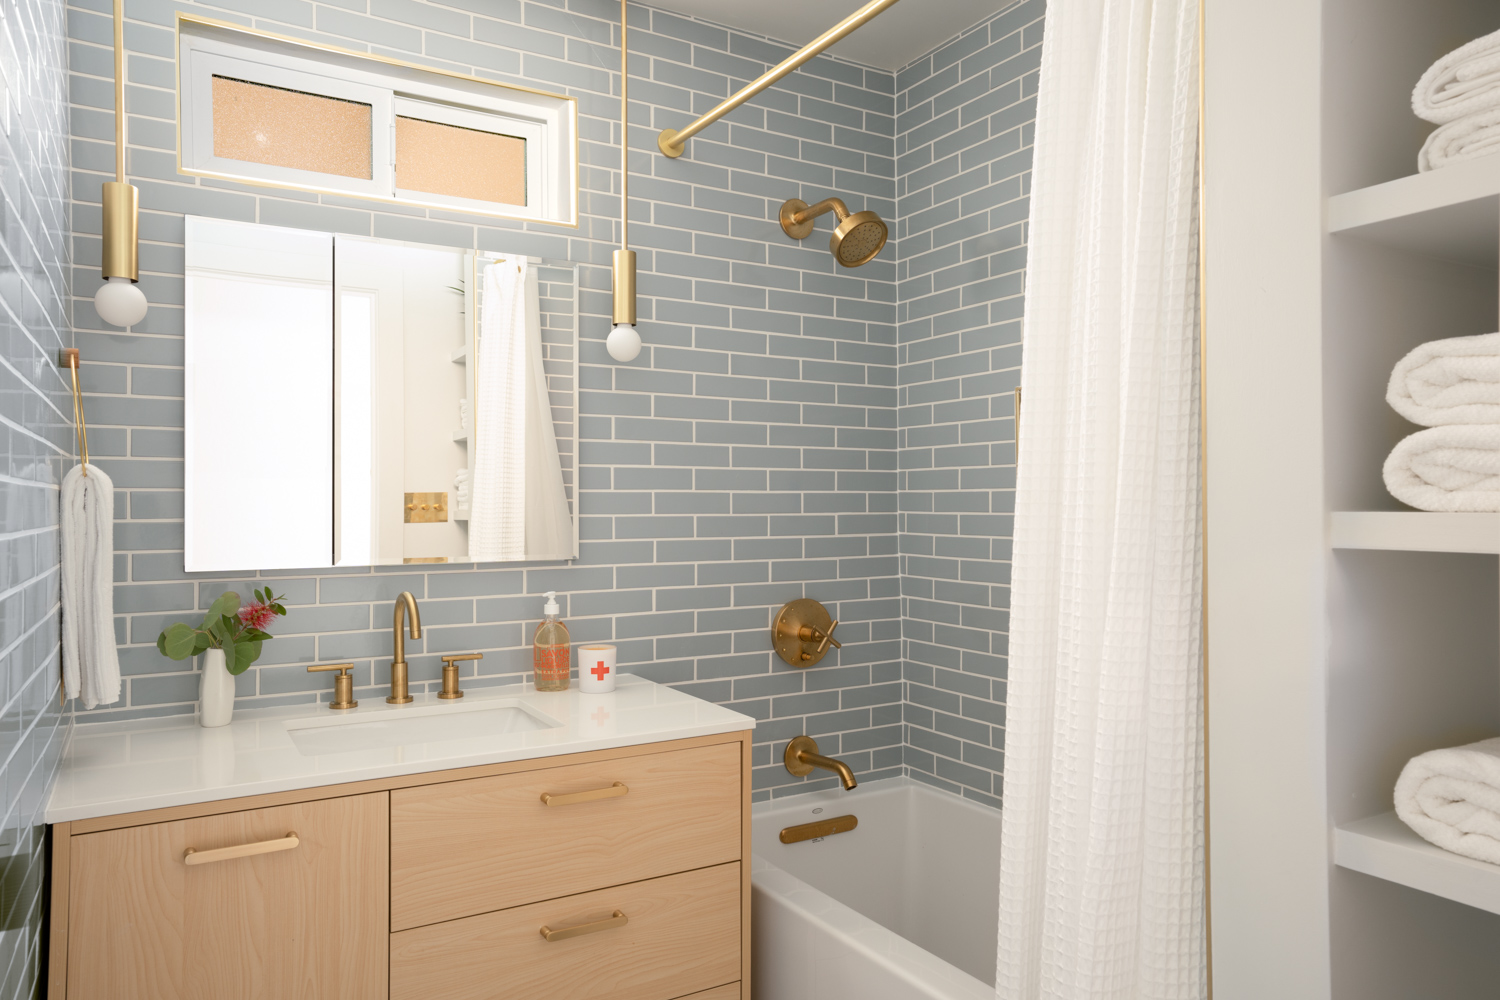 Inside a redesign of Ornida's Bathroom Remodeling Company